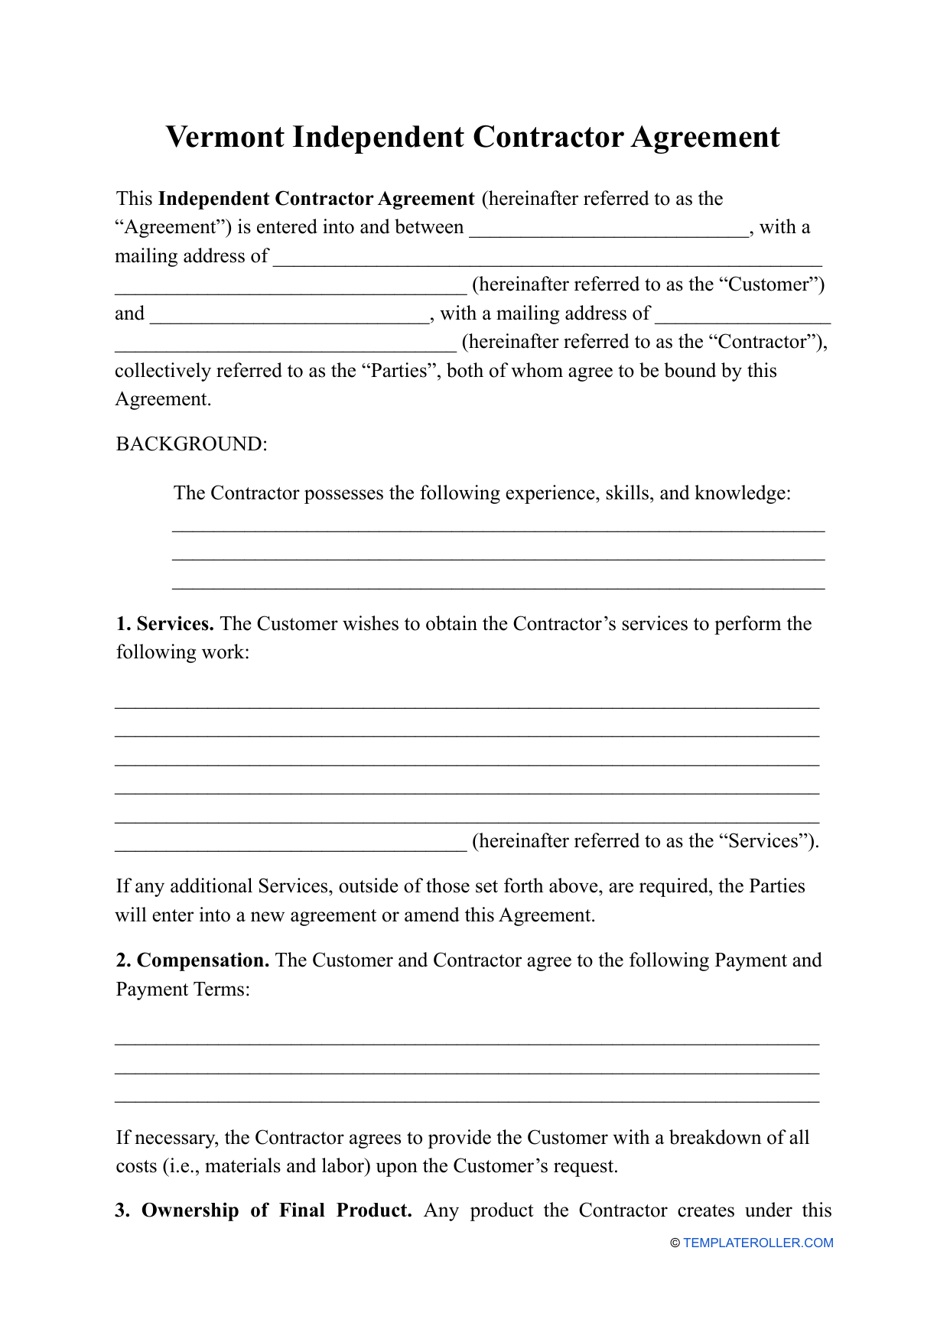 Independent Contractor Agreement Template - Vermont, Page 1